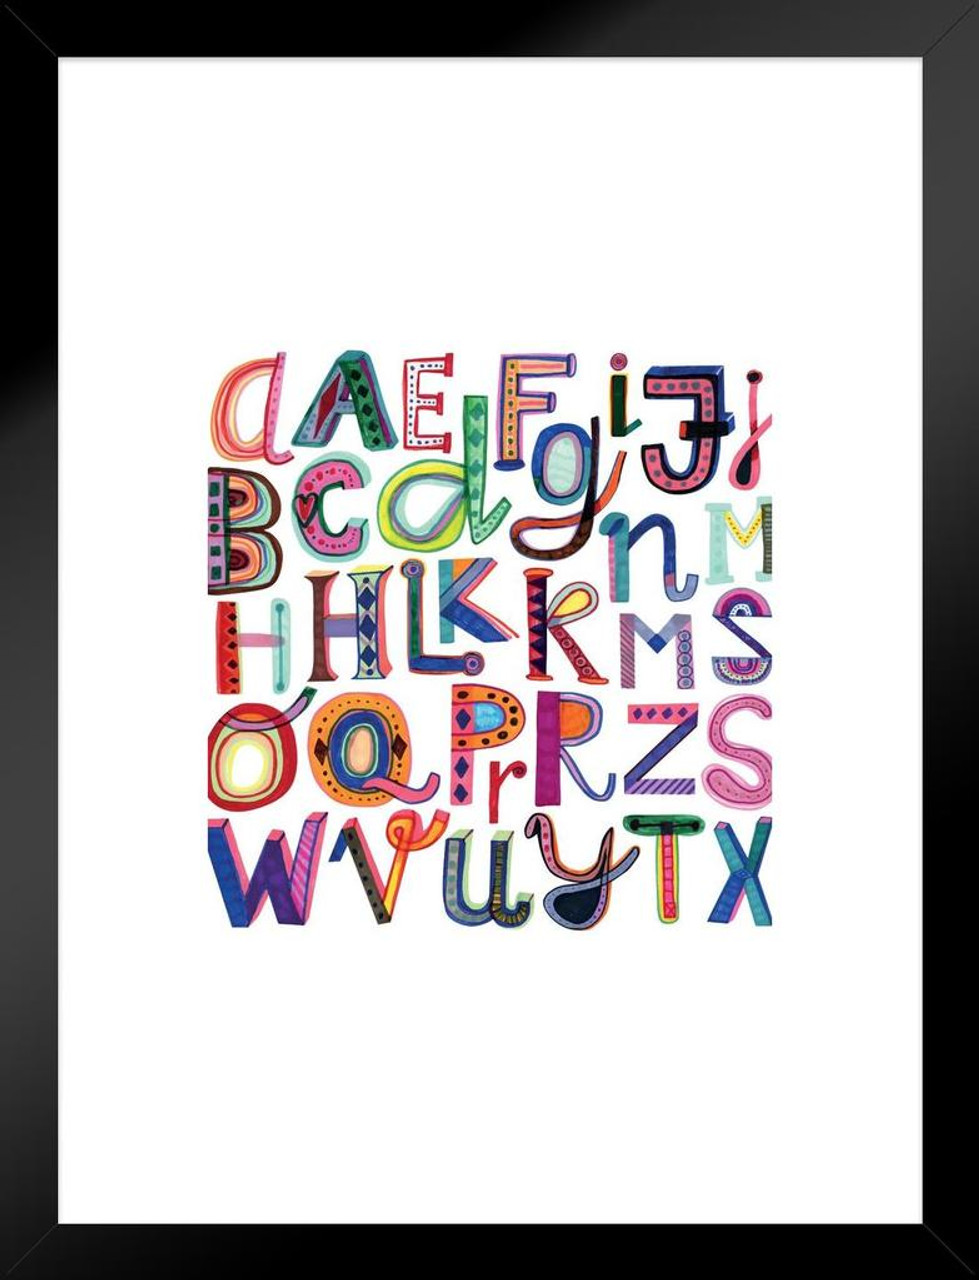 Colorful Write the Alphabet Chart